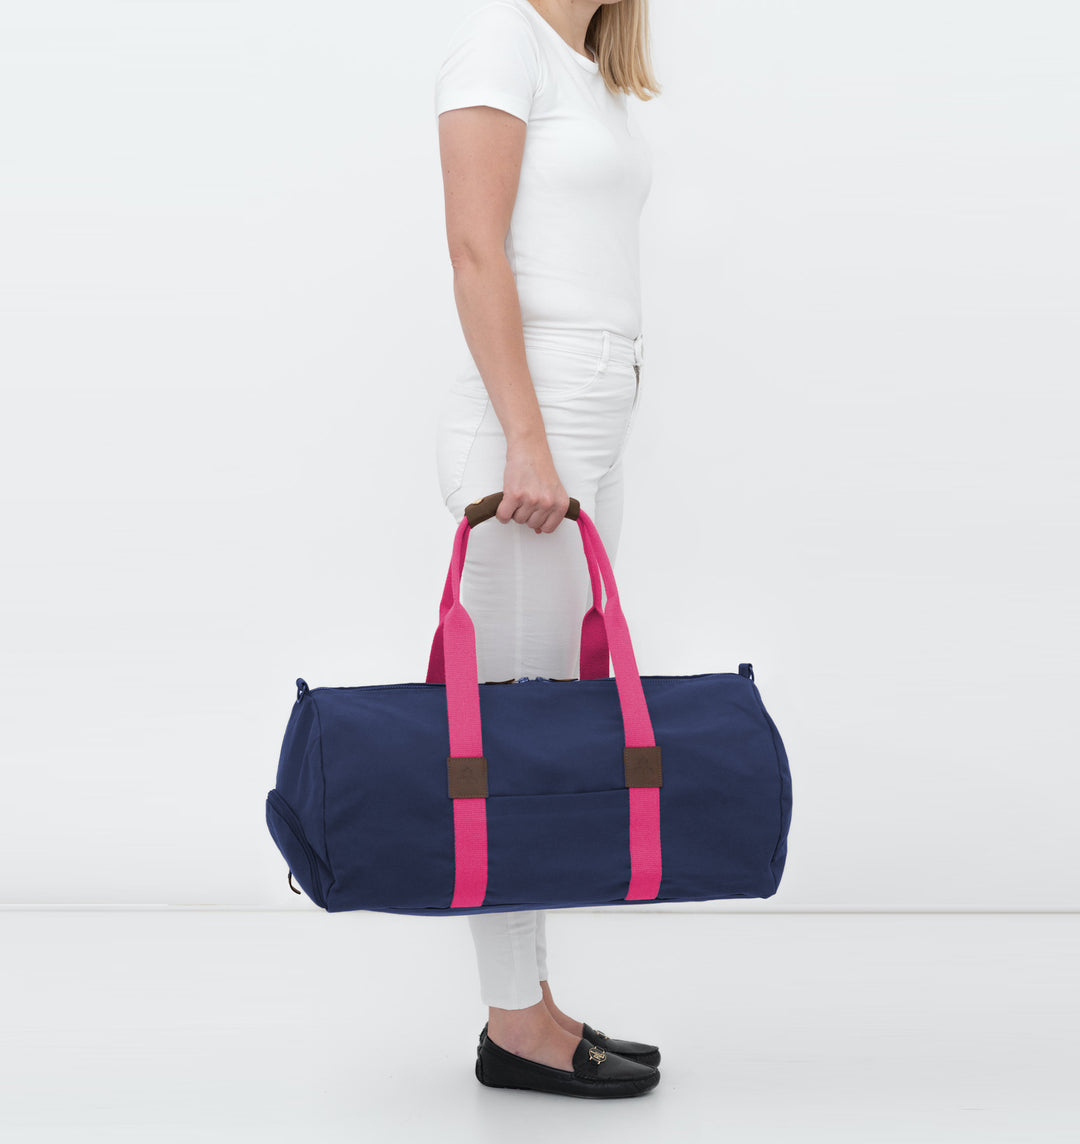 Dufflebag -M- NAVY with pink strap